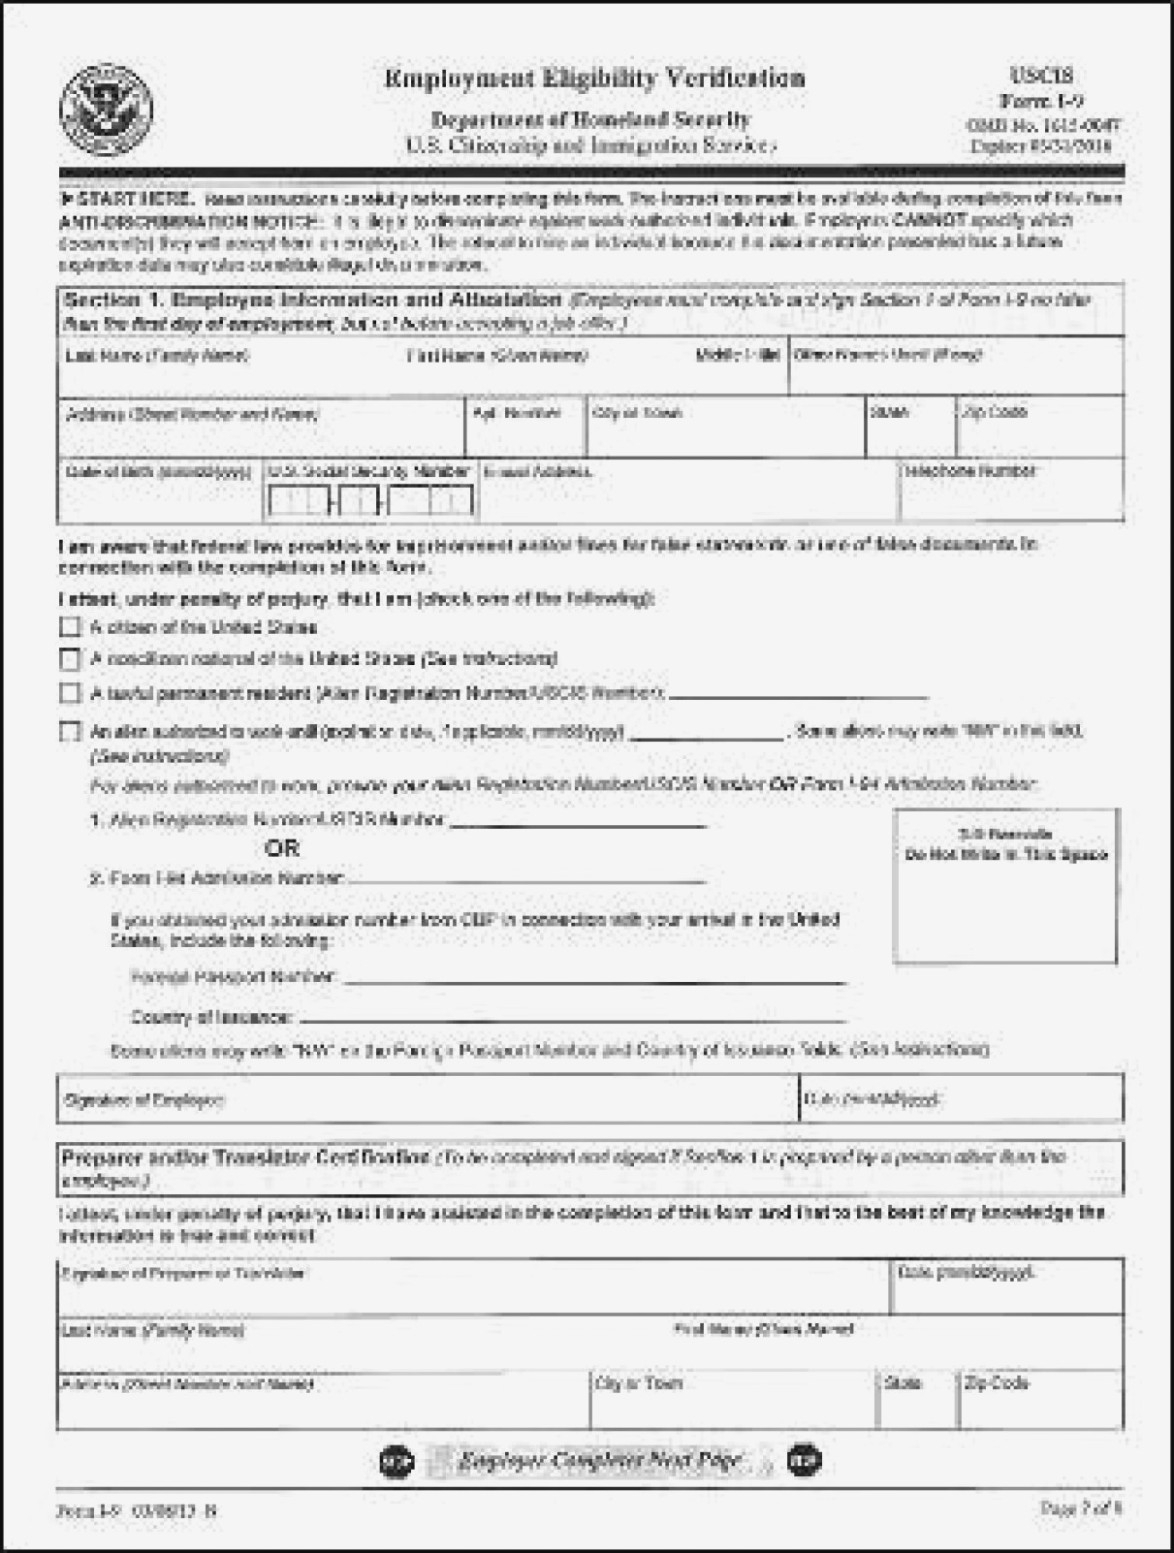 Updated I 9 Form Income Tax I-9 2019 Instructions September